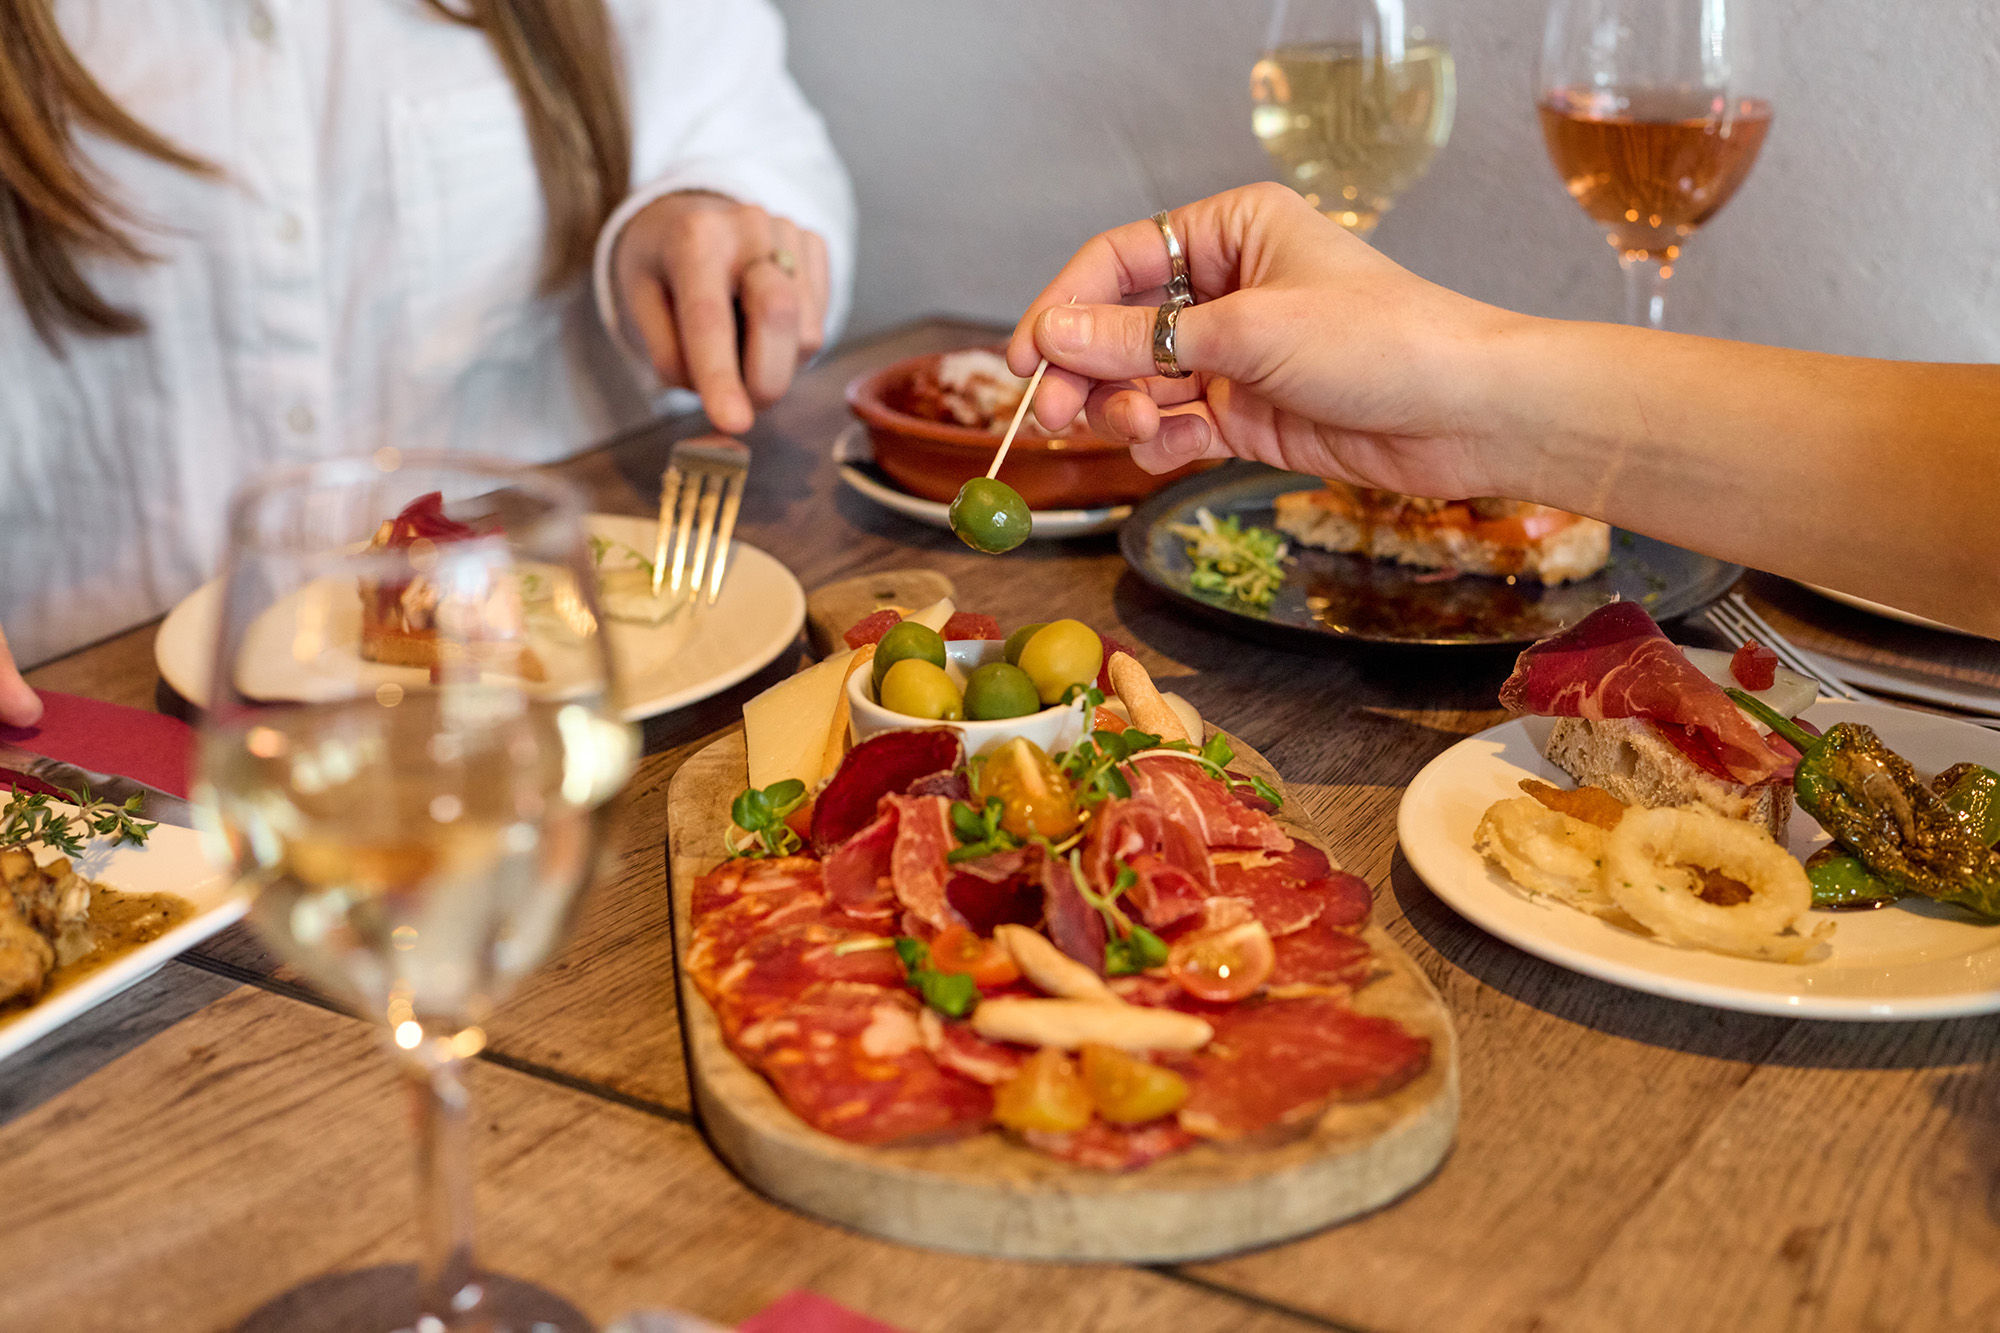 Antipasti at Tinto Taperia with a selection of meats on a chopping board. There's a bowl of mixed olives with two women eating food. Two glasses of white wine are on the table.